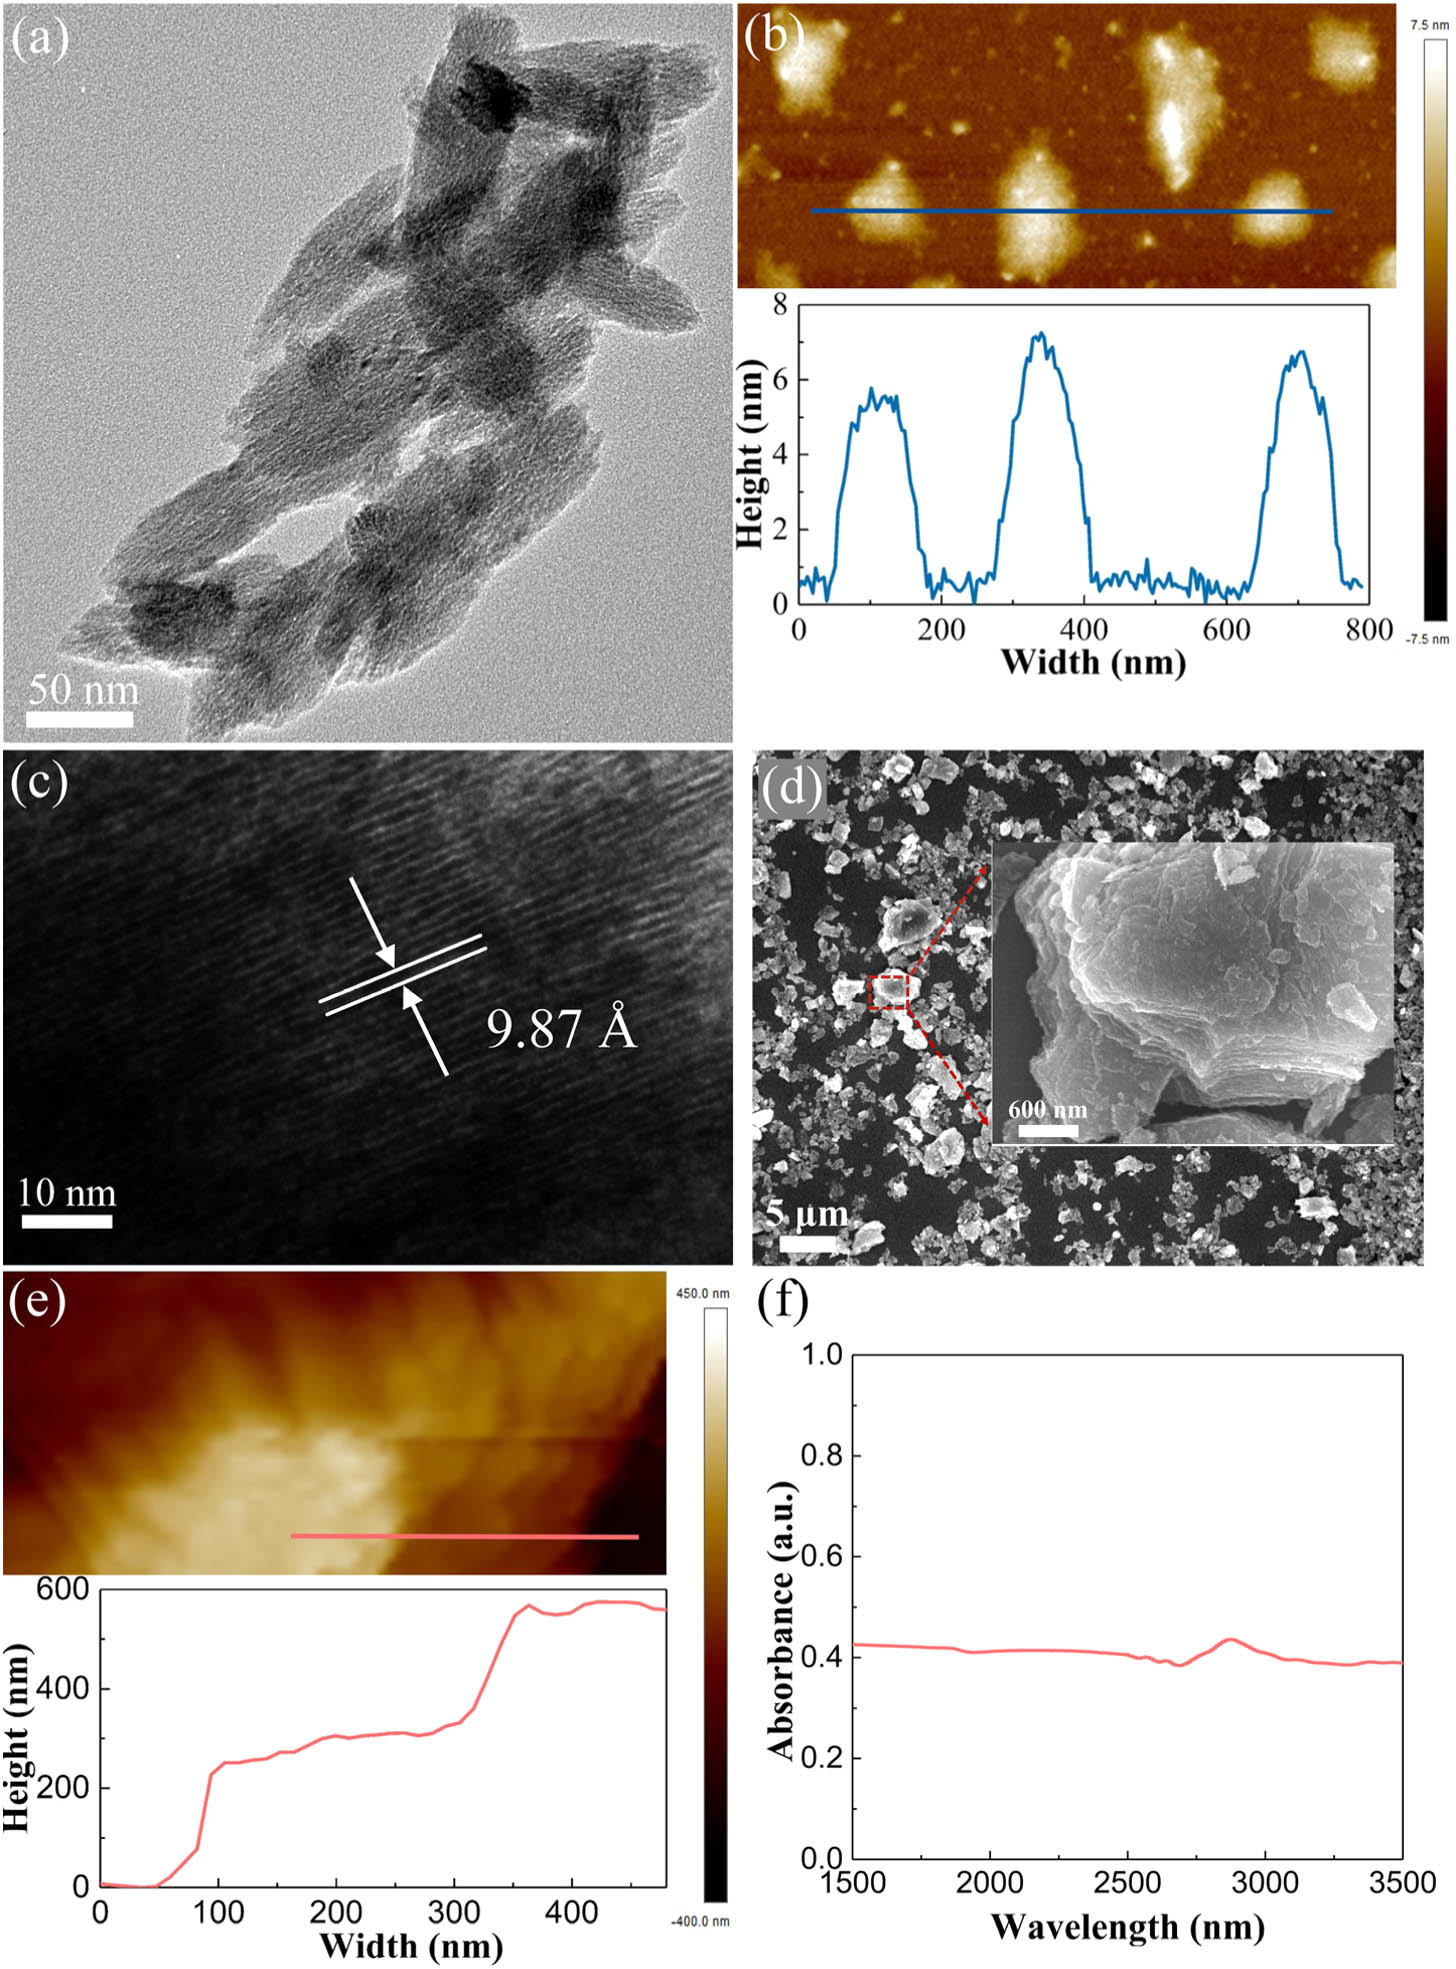 (a) TEM image of the Ti3C2Tx nanosheets on a scale of 50 nm. (b) AFM image of few-layered Ti3C2Tx on a scale of 200 nm and the corresponding height profile. (c) HRTEM image of Ti3C2Tx nanosheets on a scale of 10 nm. (d) SEM images of Ti3C2Tx nanosheets on a scale of 5 μm and 600 nm (inset). (e) AFM image of multi-layered Ti3C2Tx nanosheets on a scale of 200 nm and the corresponding height profile. (f) Linear absorption spectrum of Ti3C2Tx powder.